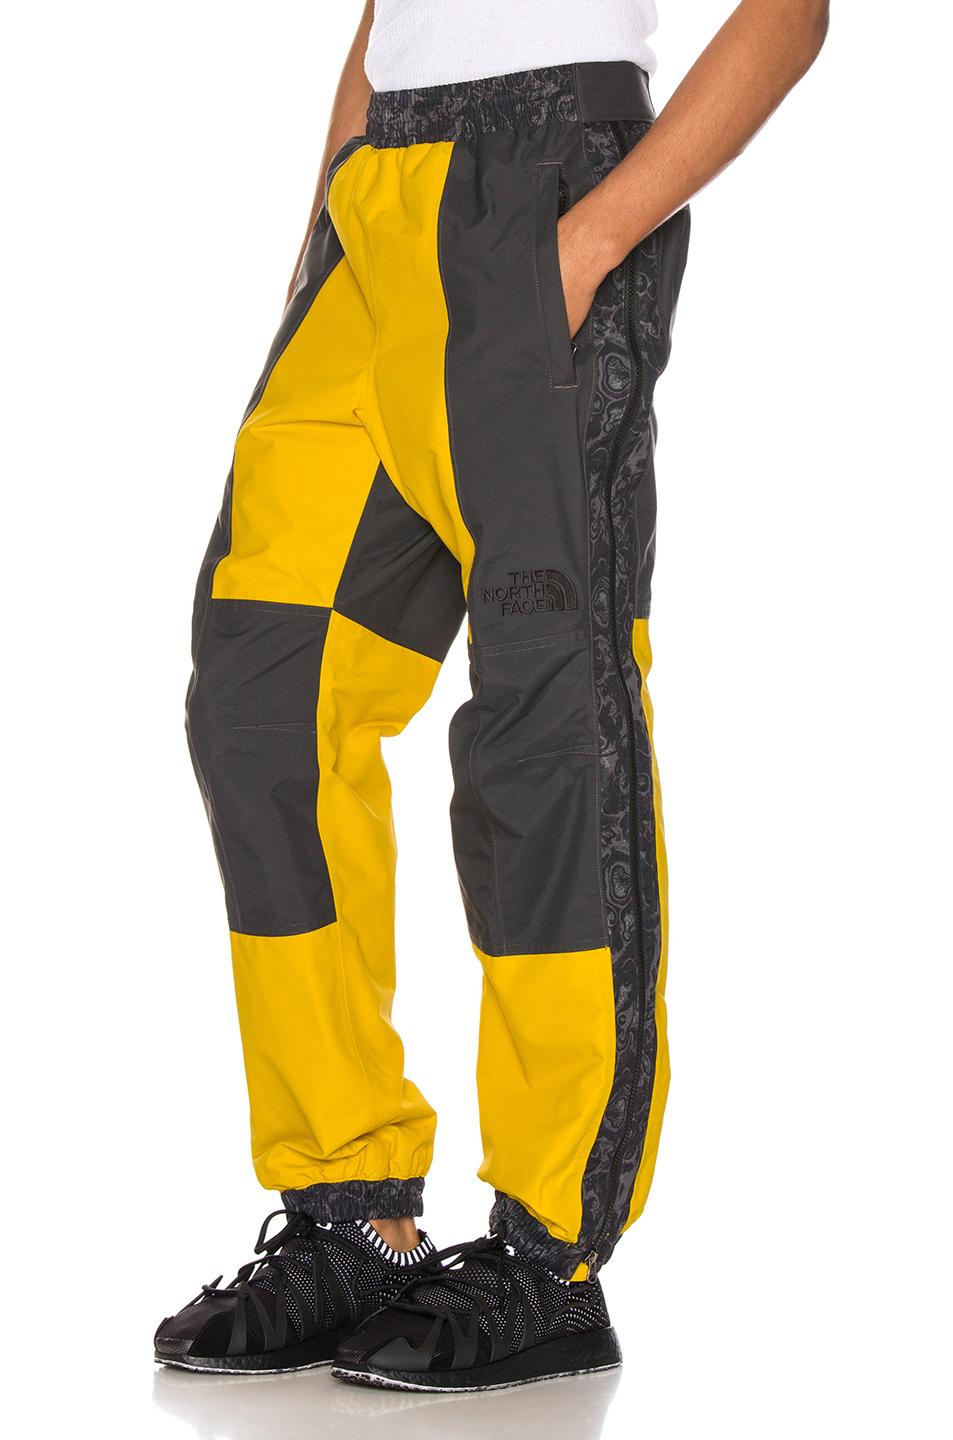 THE NORTH FACE BLACK SERIES 94 Rage Rain Pant in Leopard Yellow & Asphalt  Grey (Yellow) for Men - Lyst